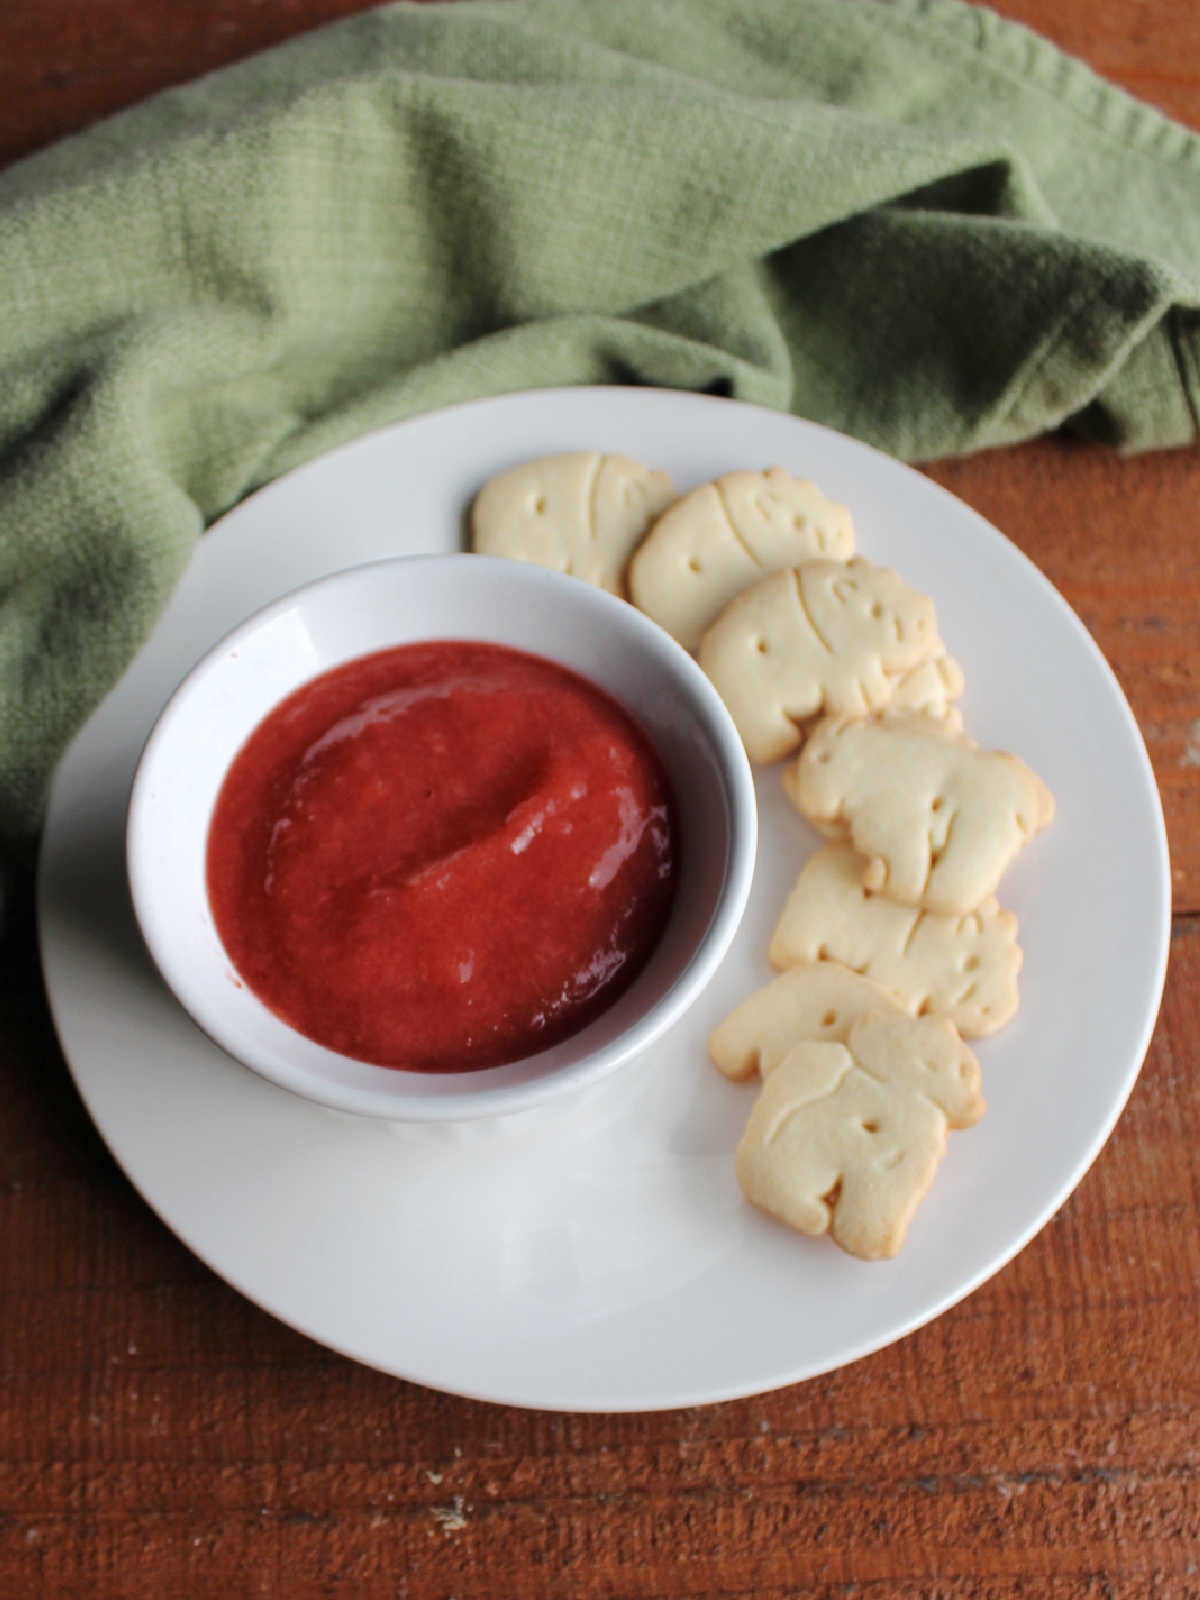 Plate with ramekin of thick strawberry rhubarb sauce with animal cookies nearby.